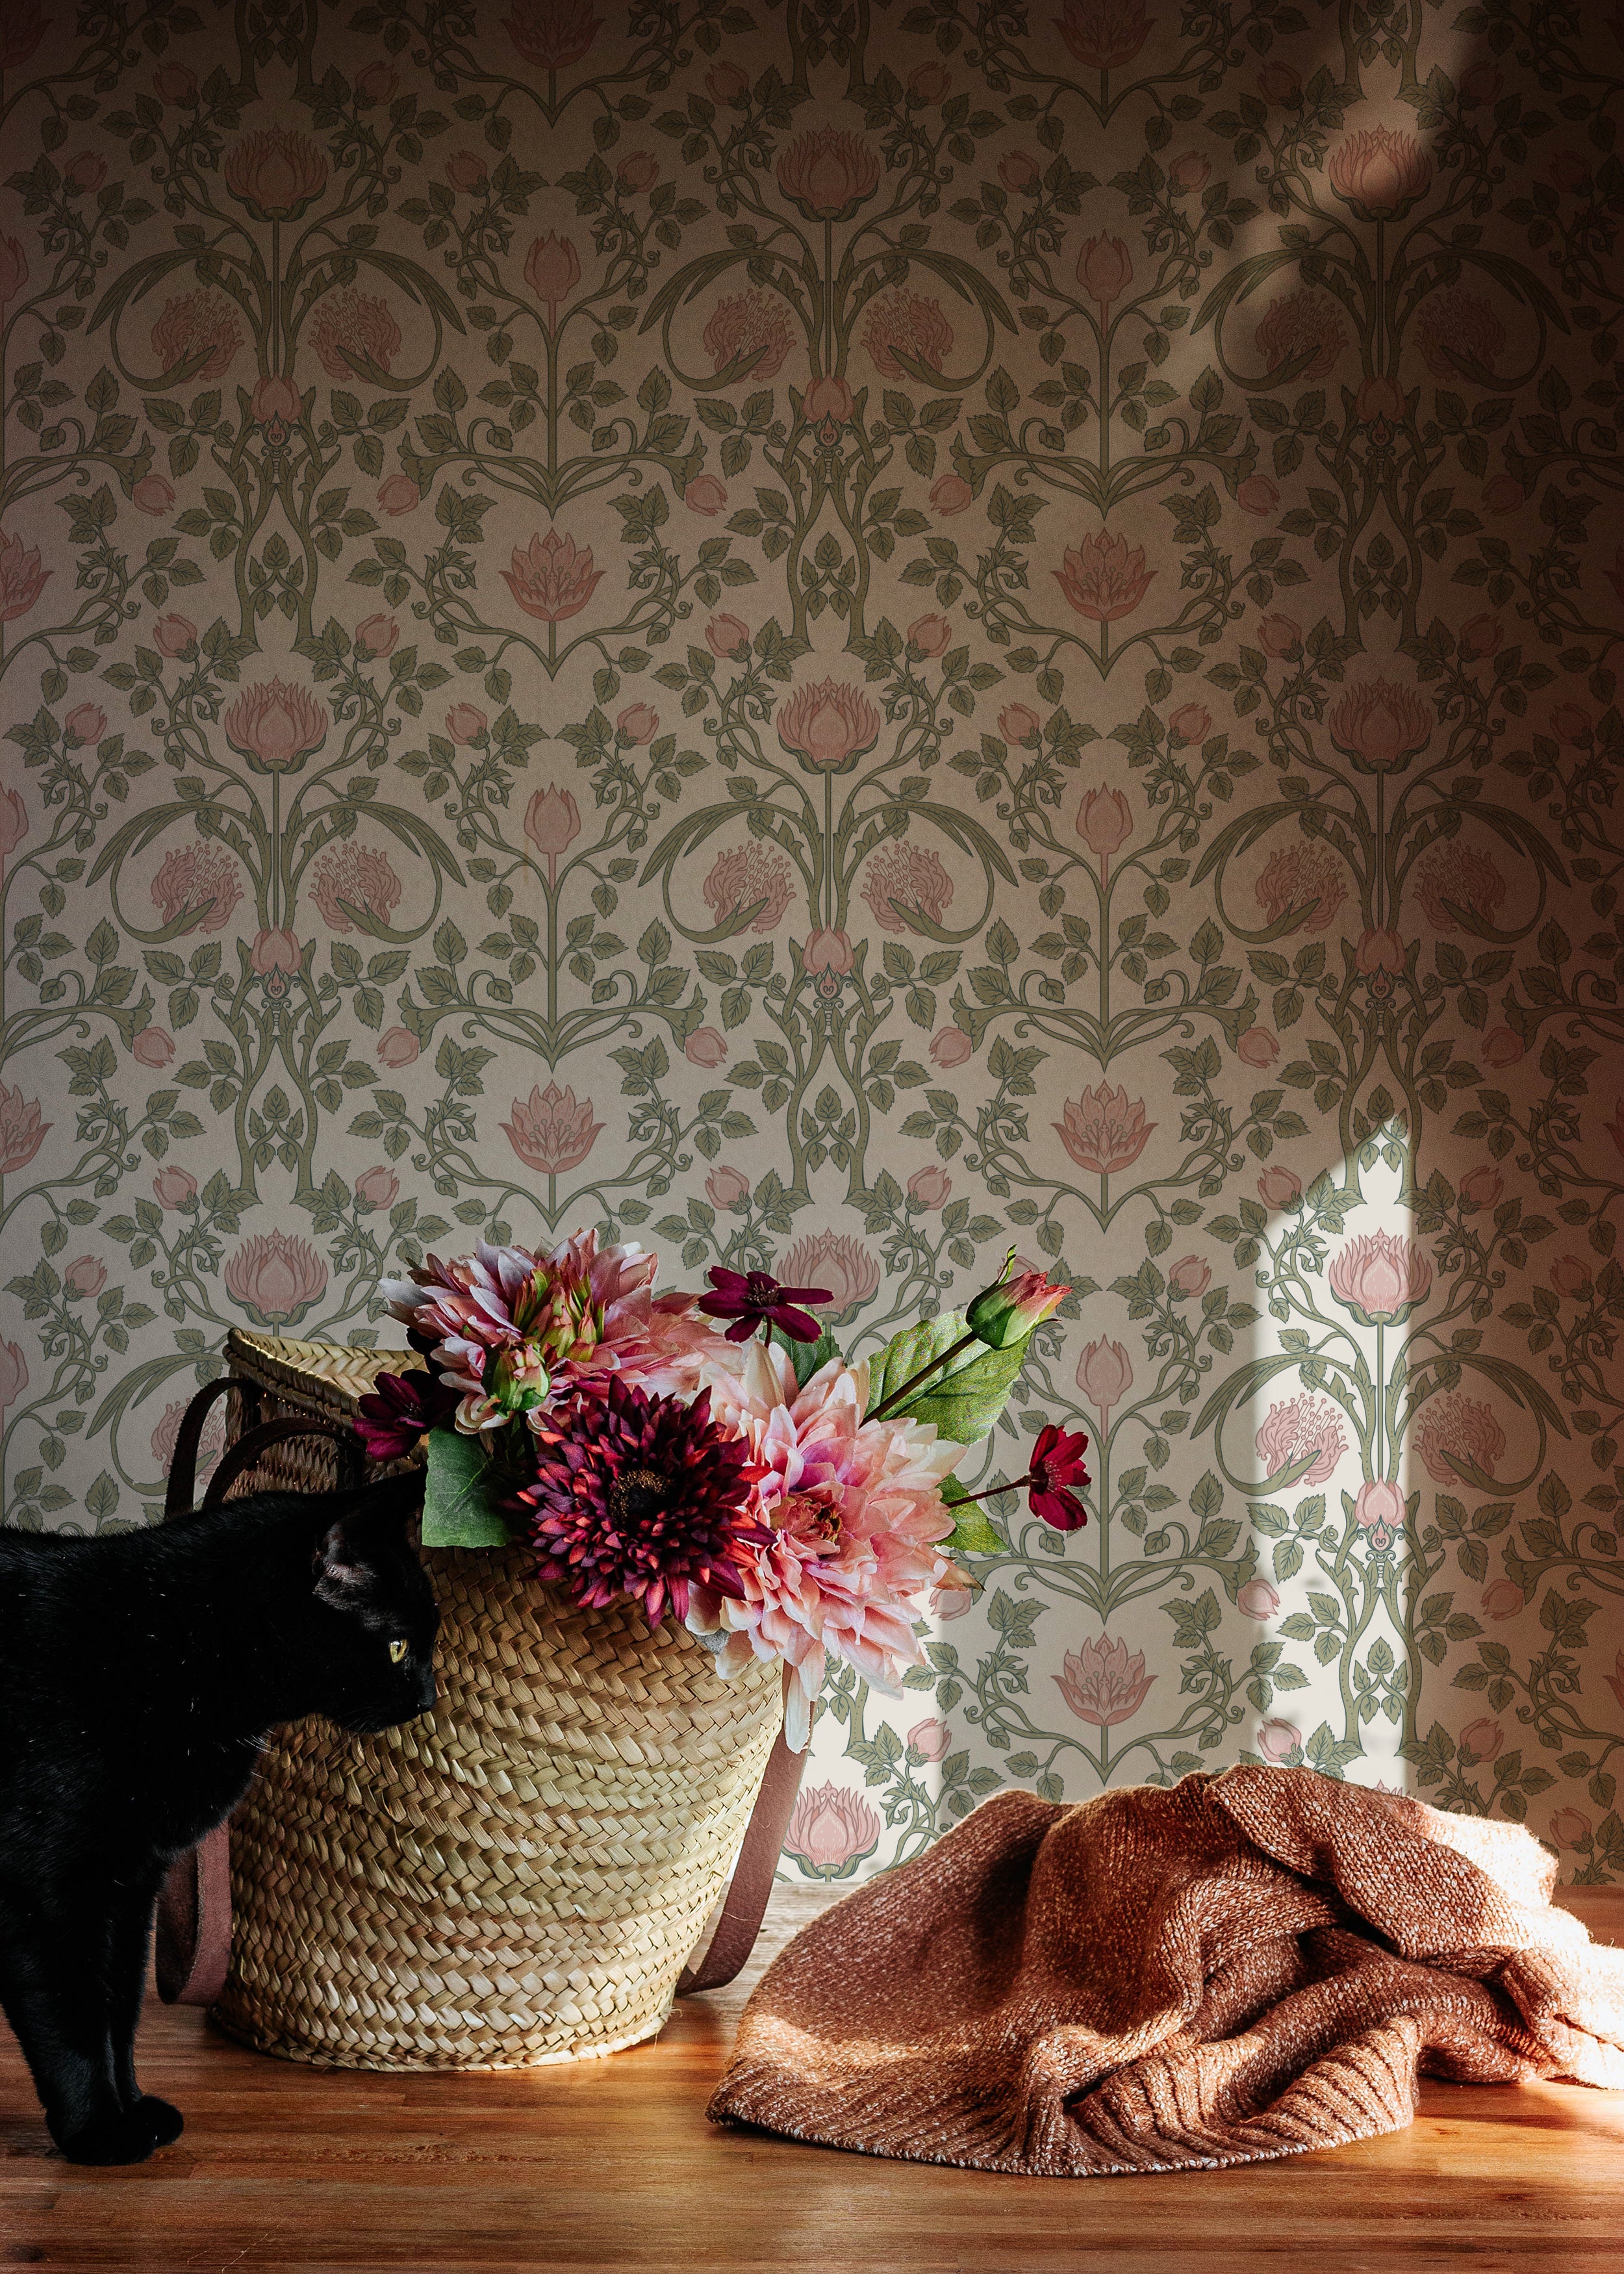 A cozy corner with a woven basket filled with lush pink flowers sits beside a black cat and a crumpled terracotta-colored blanket, against a backdrop of pastel floral damask wallpaper.